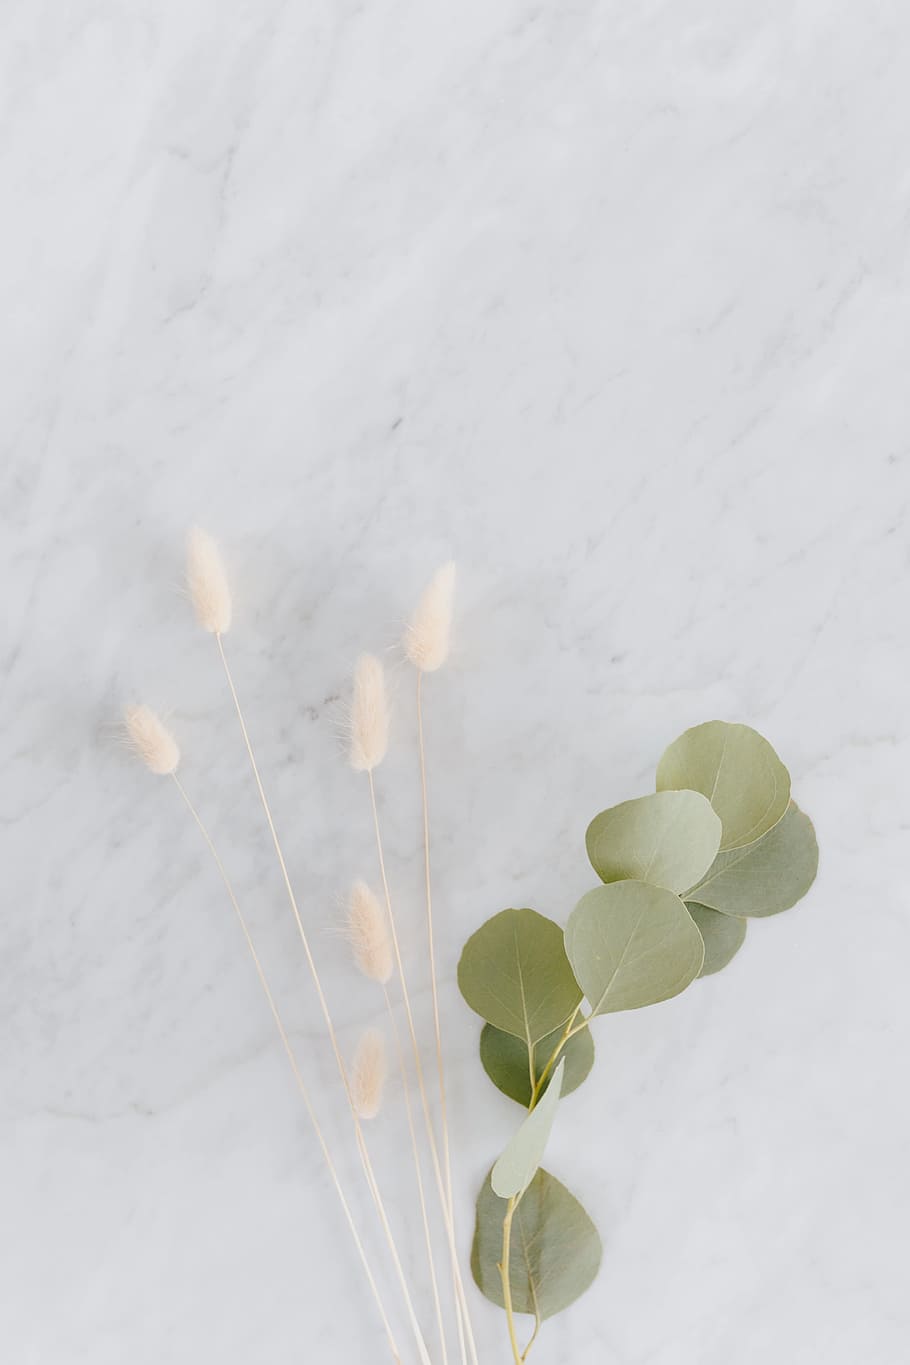 HD wallpaper: Dried flowers and eucalyptus on white marble, minimal, bright  | Wallpaper Flare